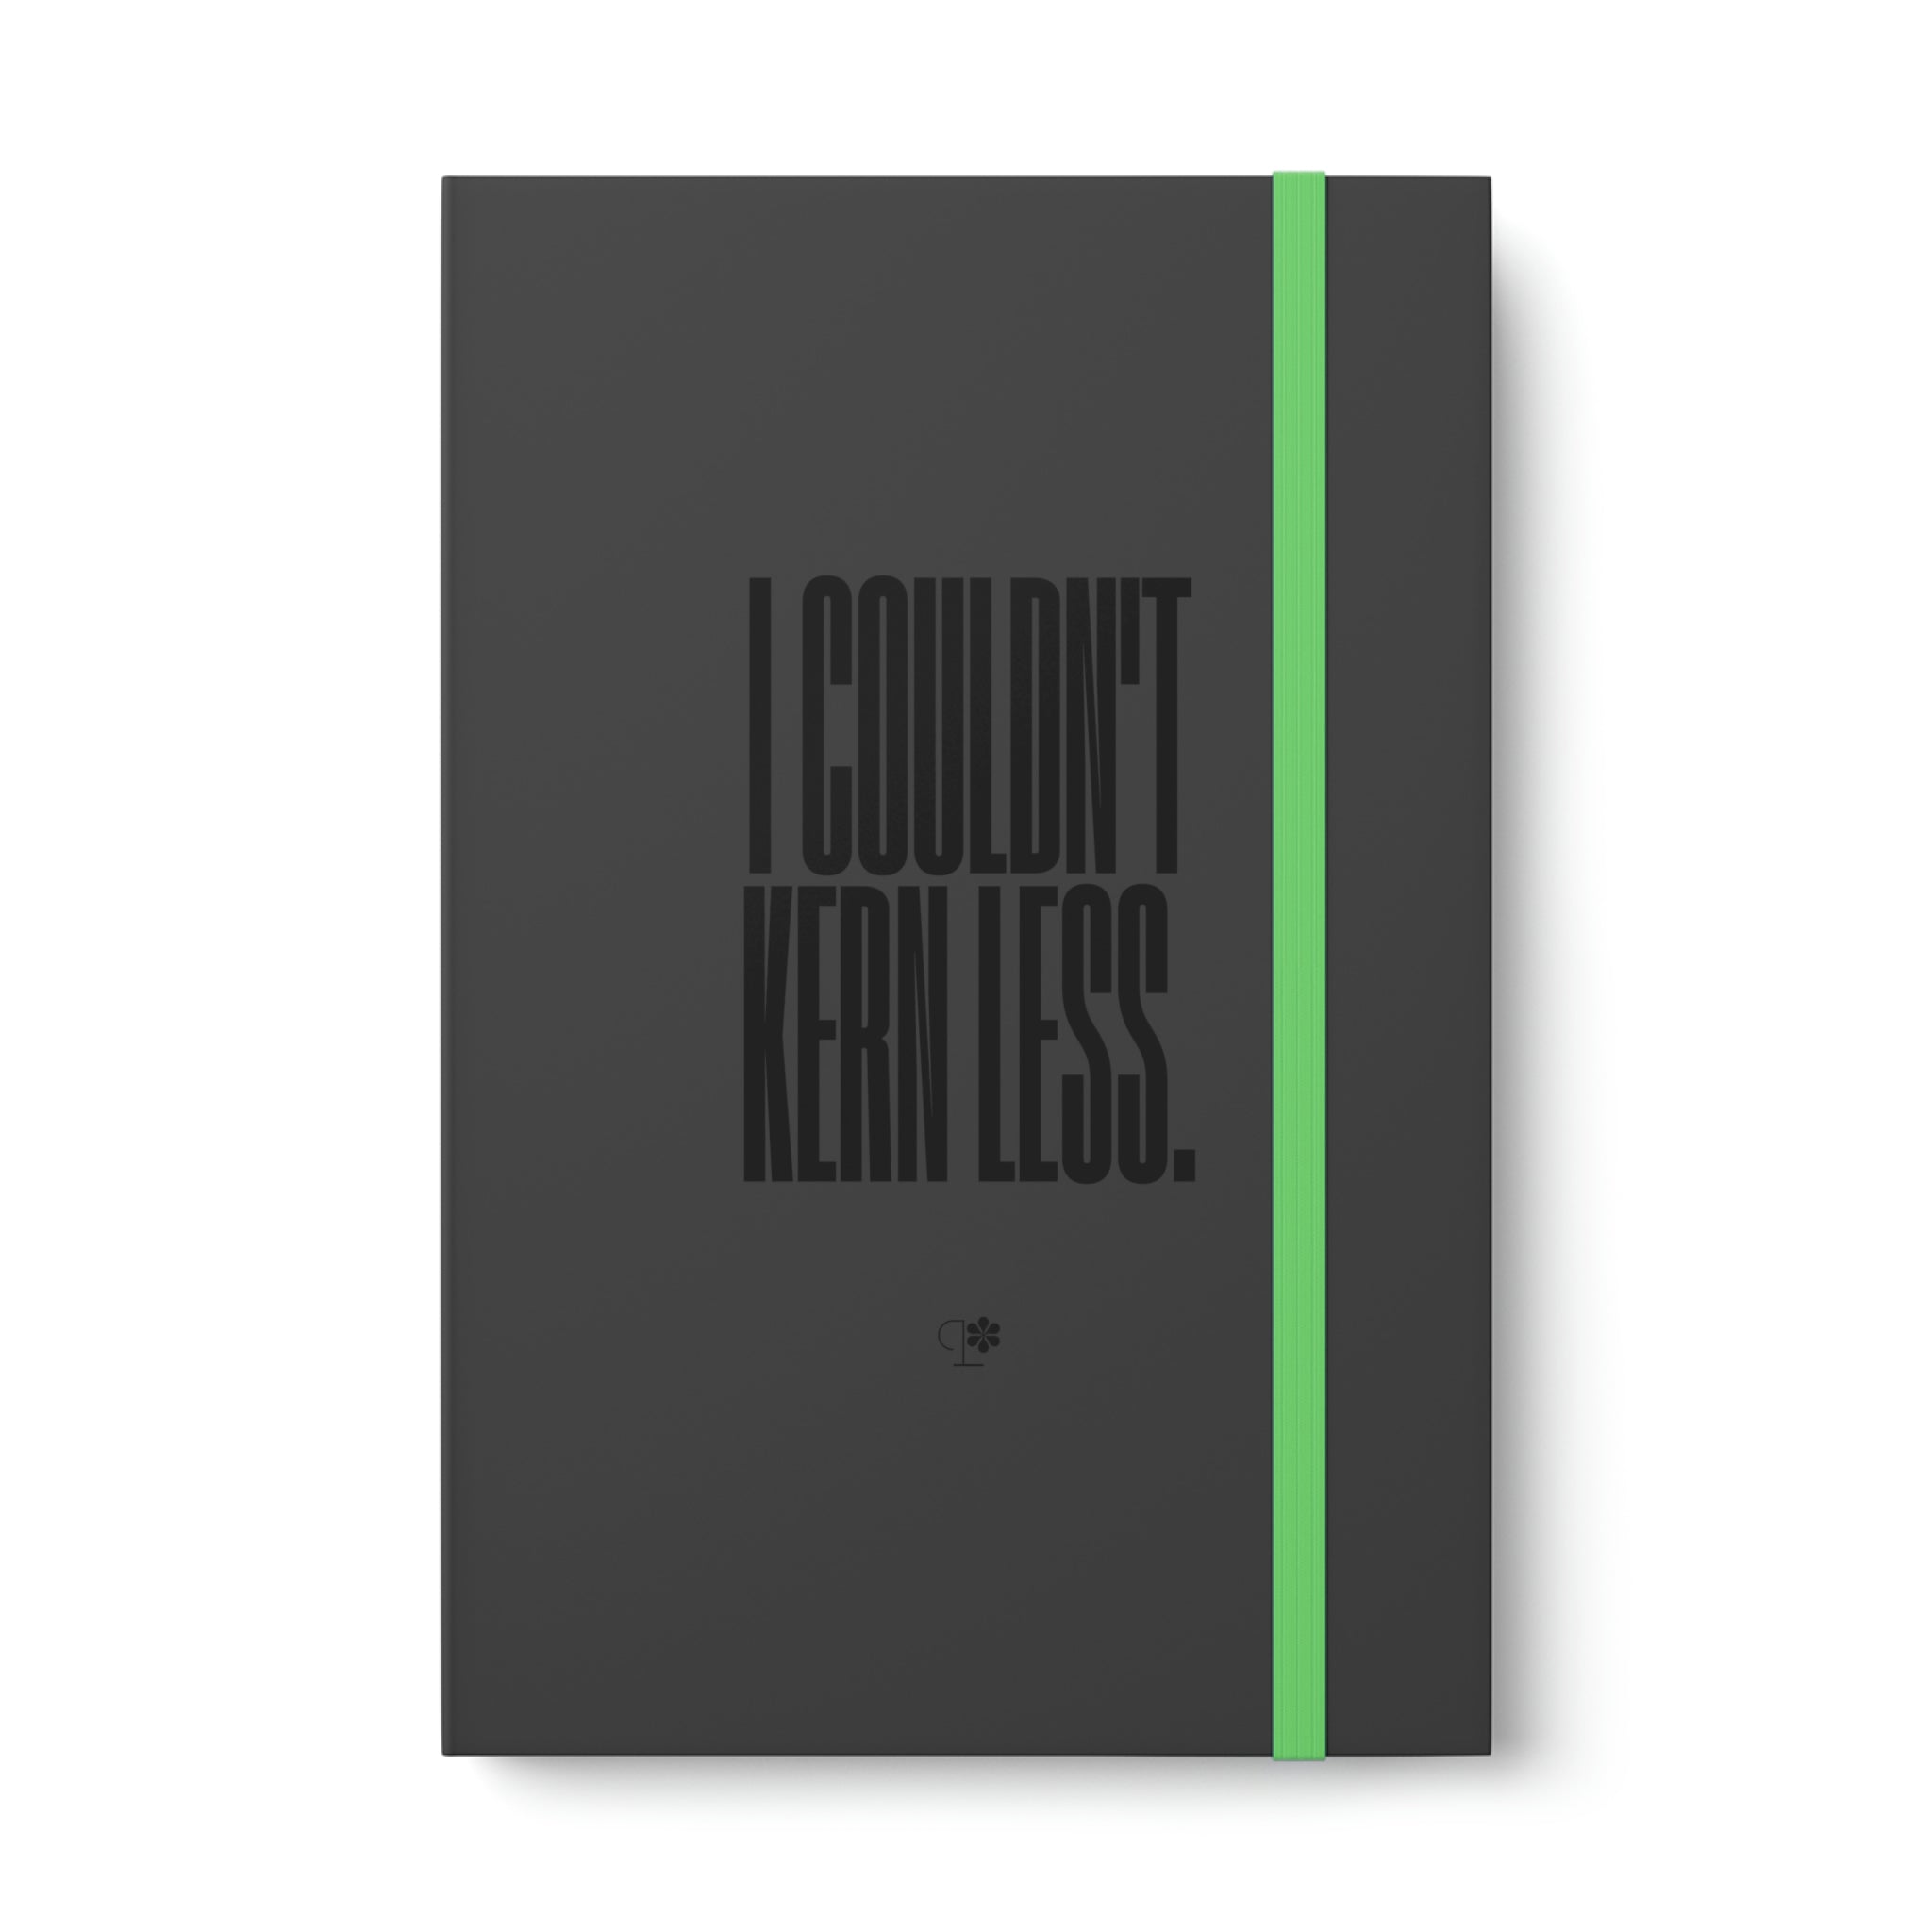 I Couldn't Kern Less (Hype) Notebook - Ruled